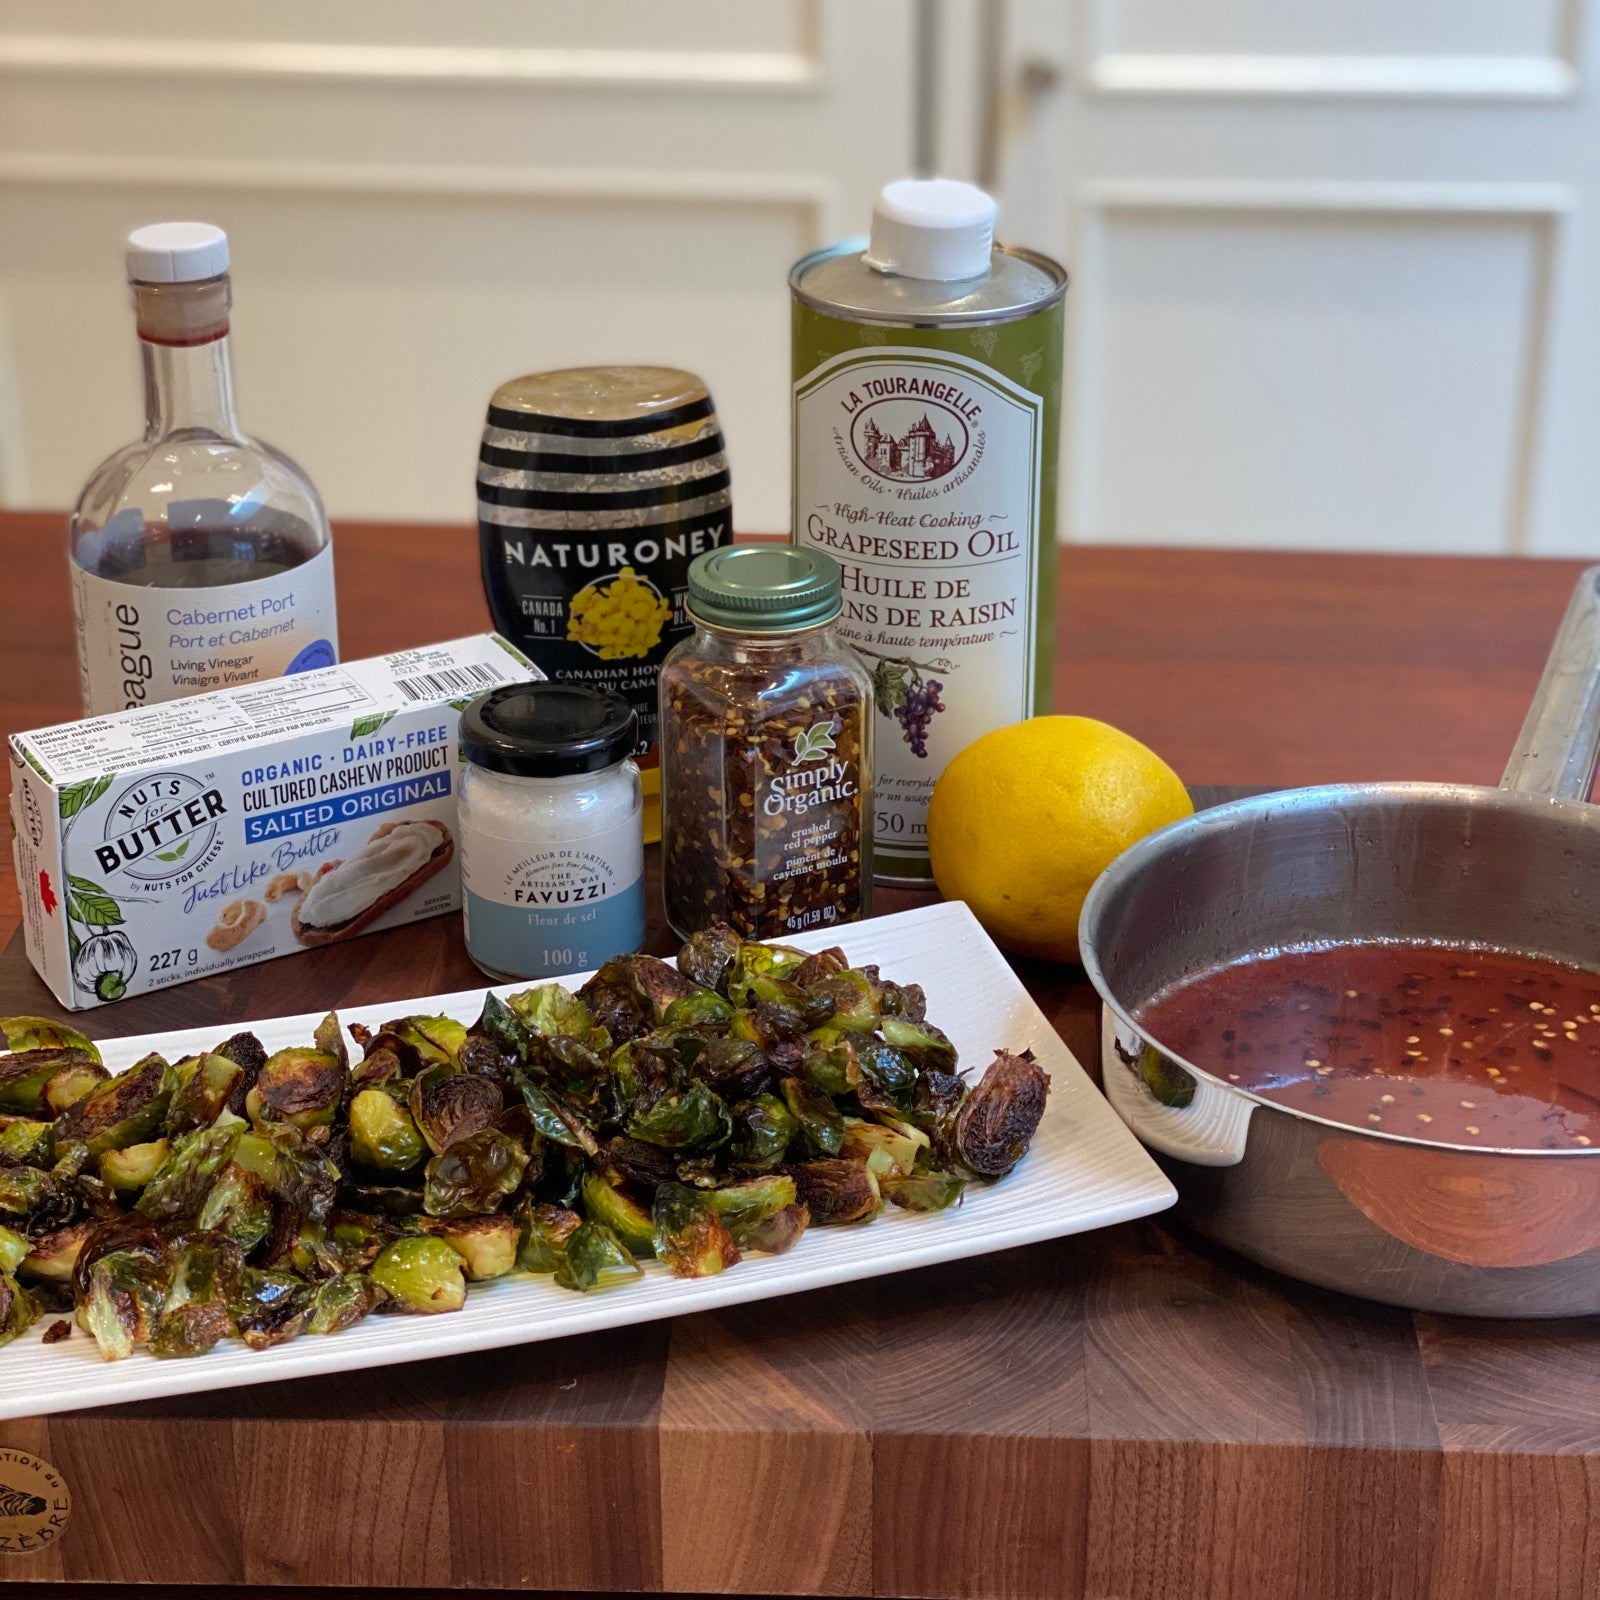 Roasted Brussel Sprouts with Warm Honey Glaze Inspired by Bon Apetit